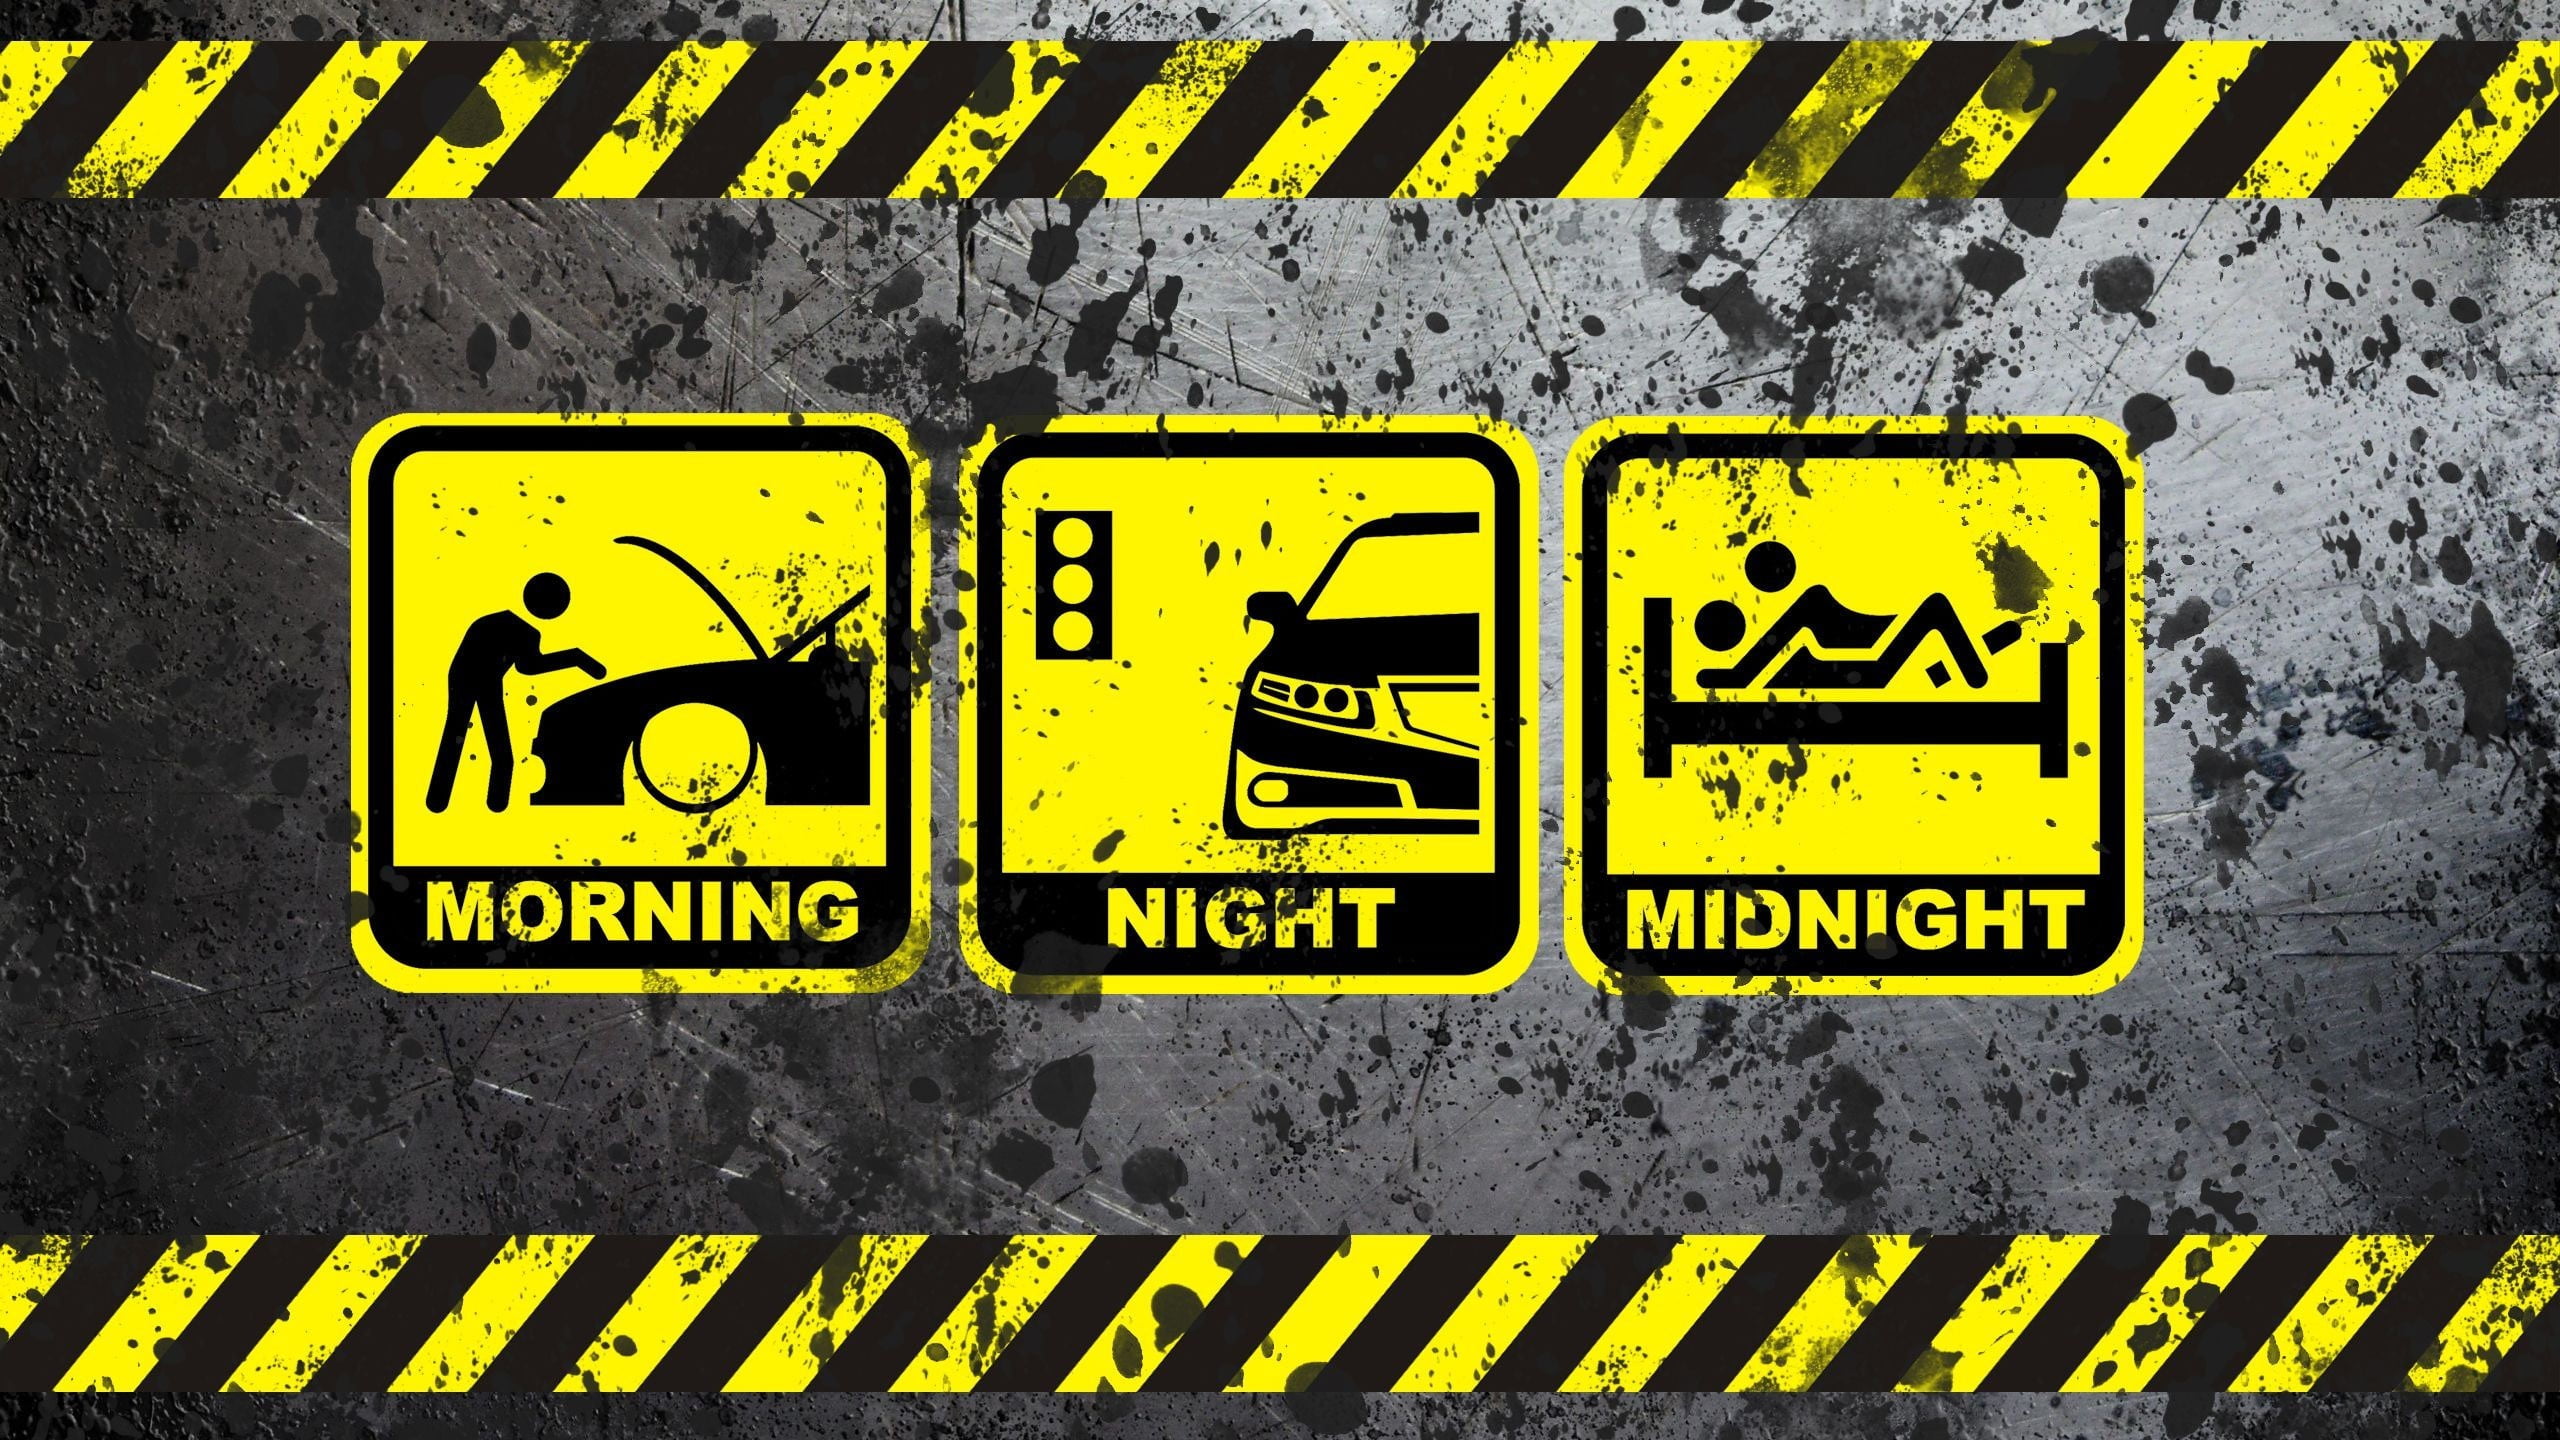 Morning Night, and Midnight poster, signs